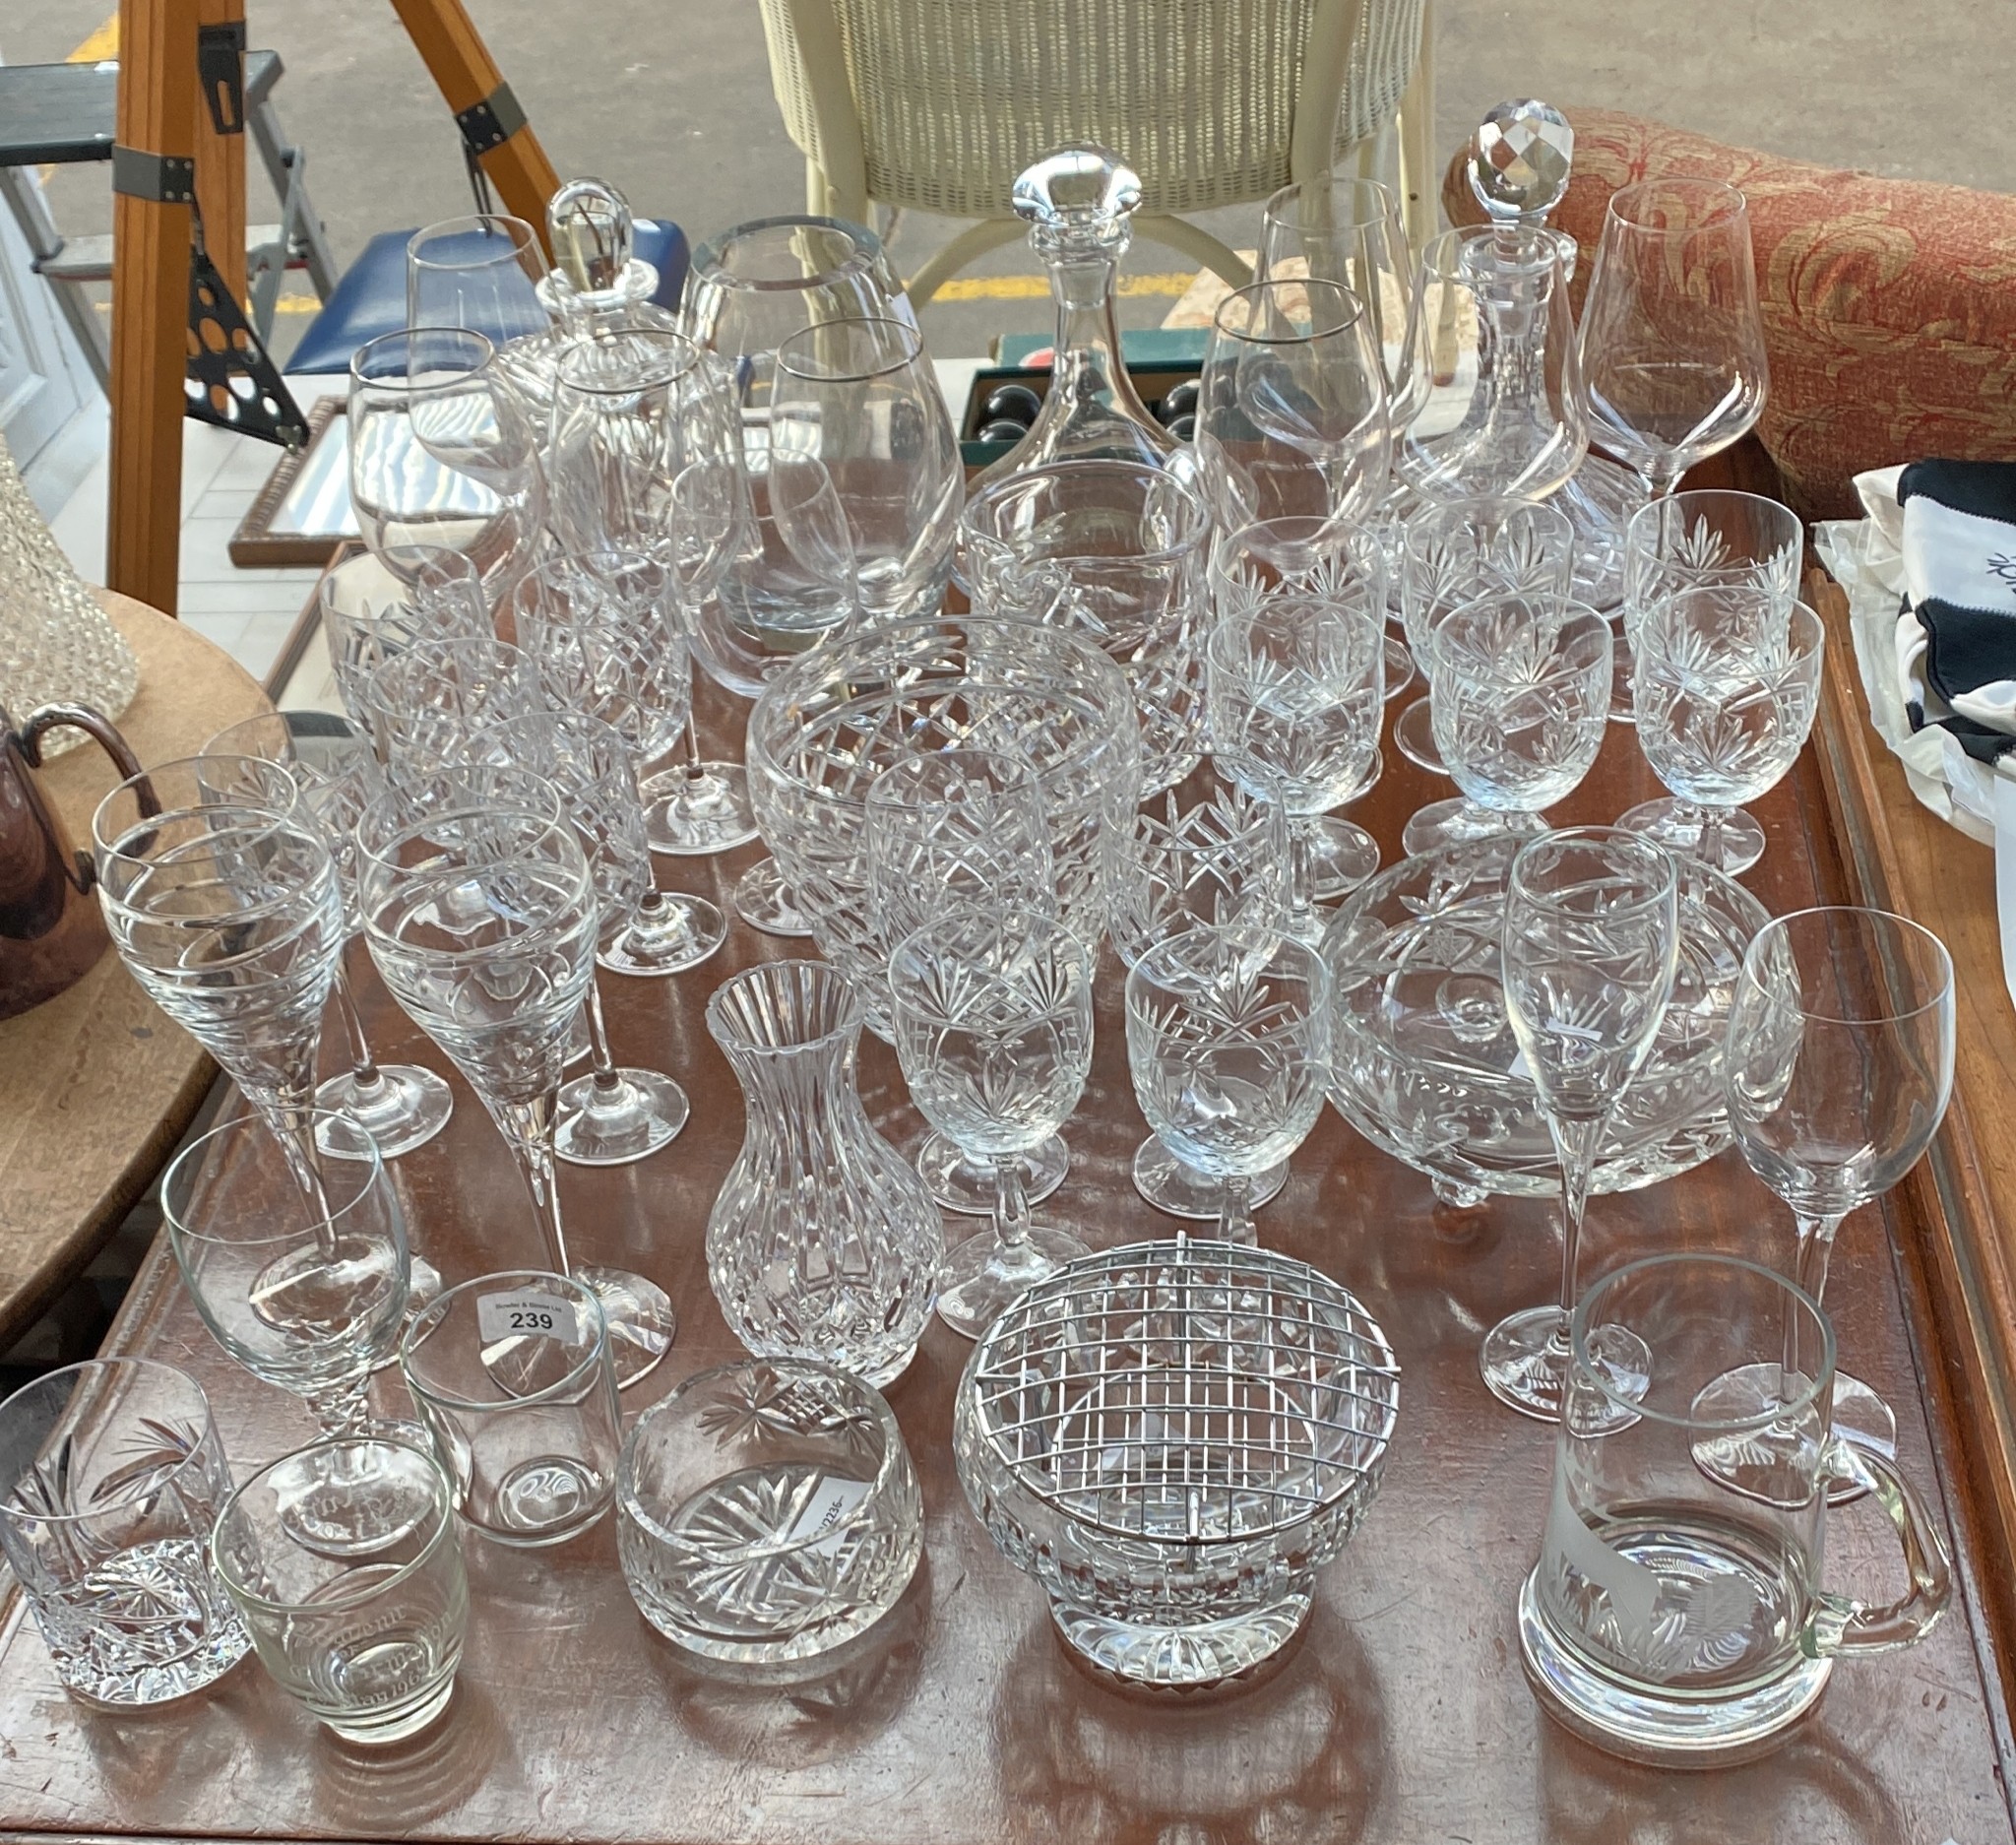 A Large quantity of crystal and glass ware to include vases, decanters and wine goblets.